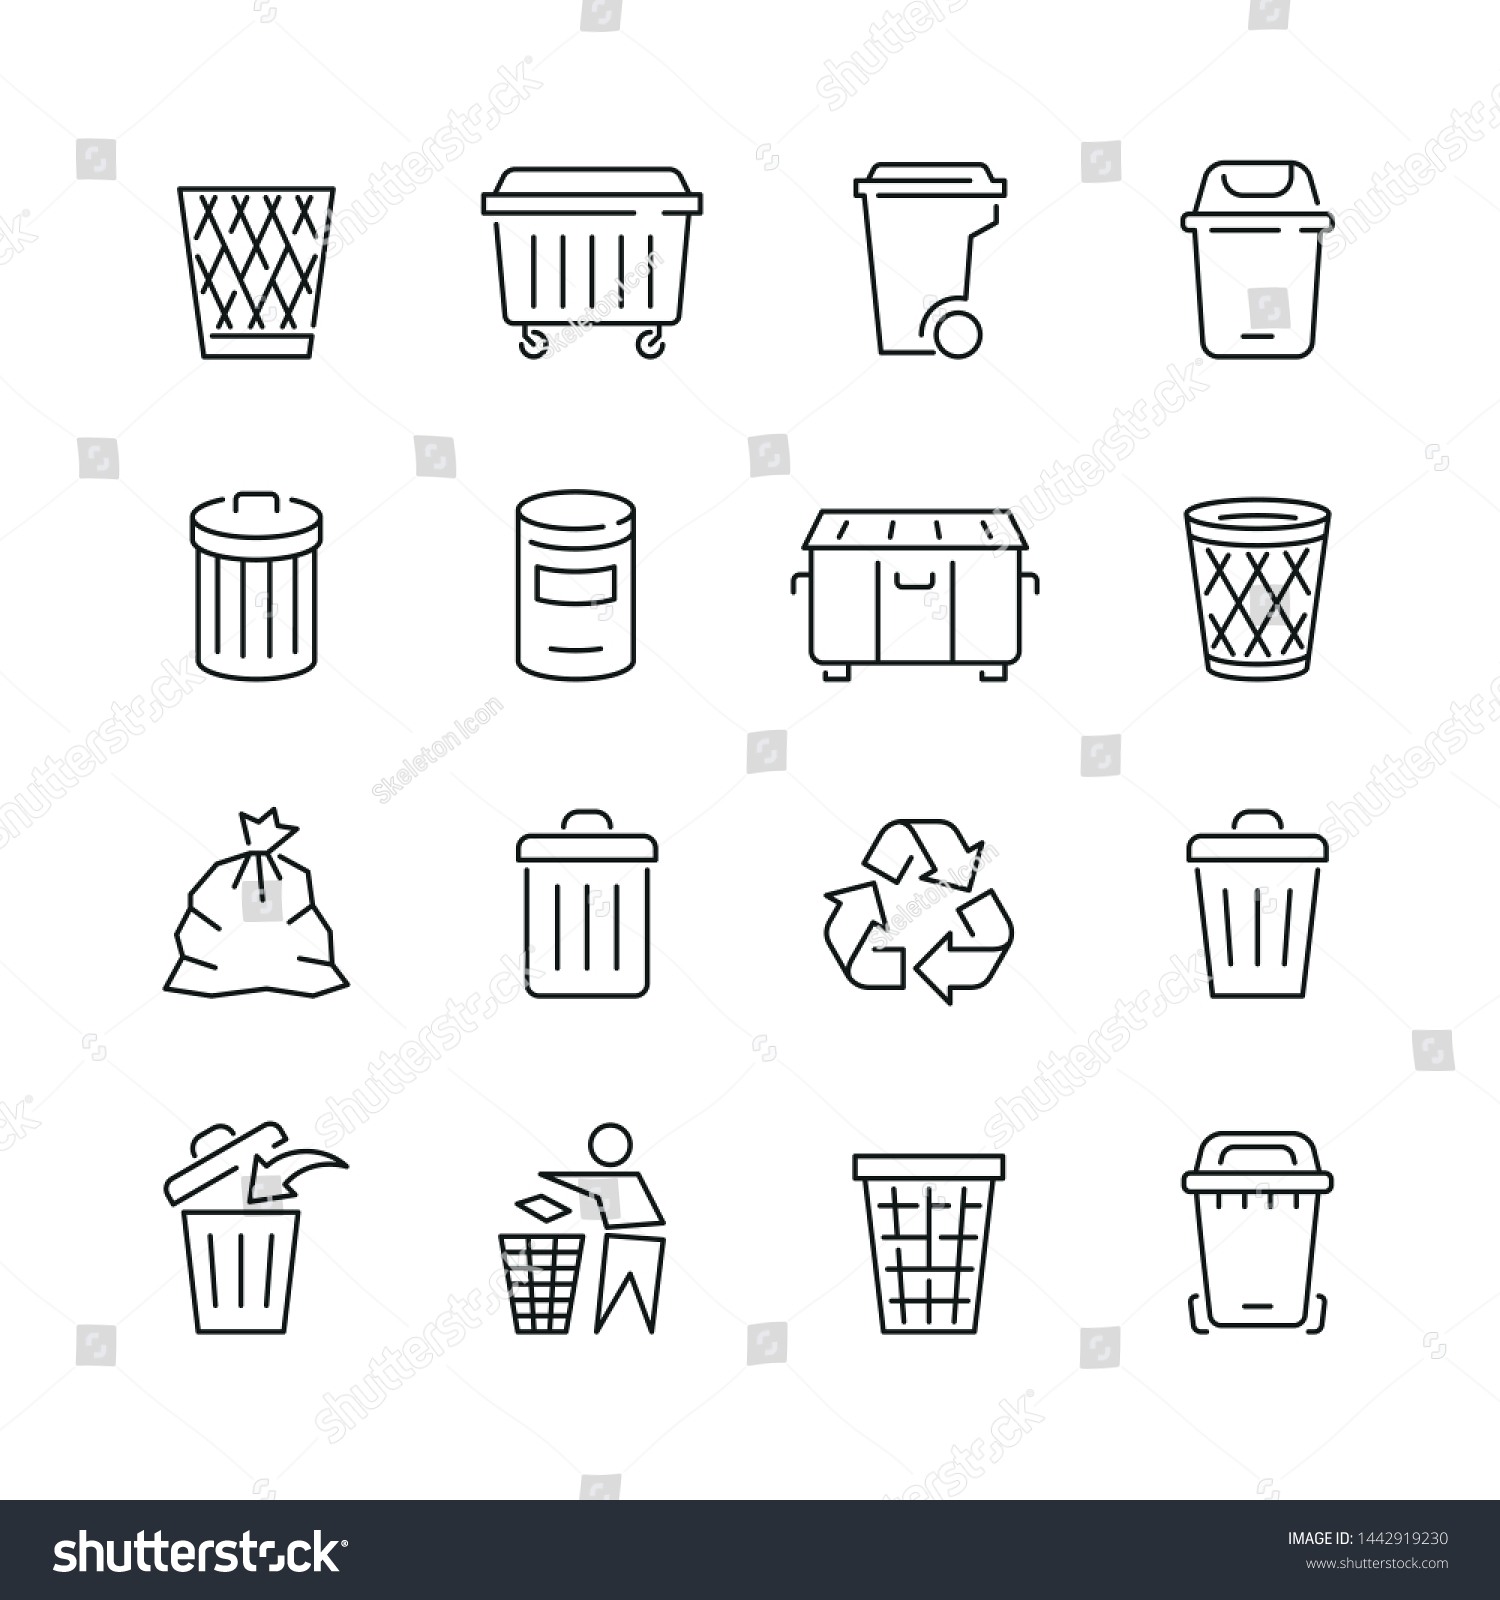 Trash can related icons: thin vector icon set, black and white kit #1442919230